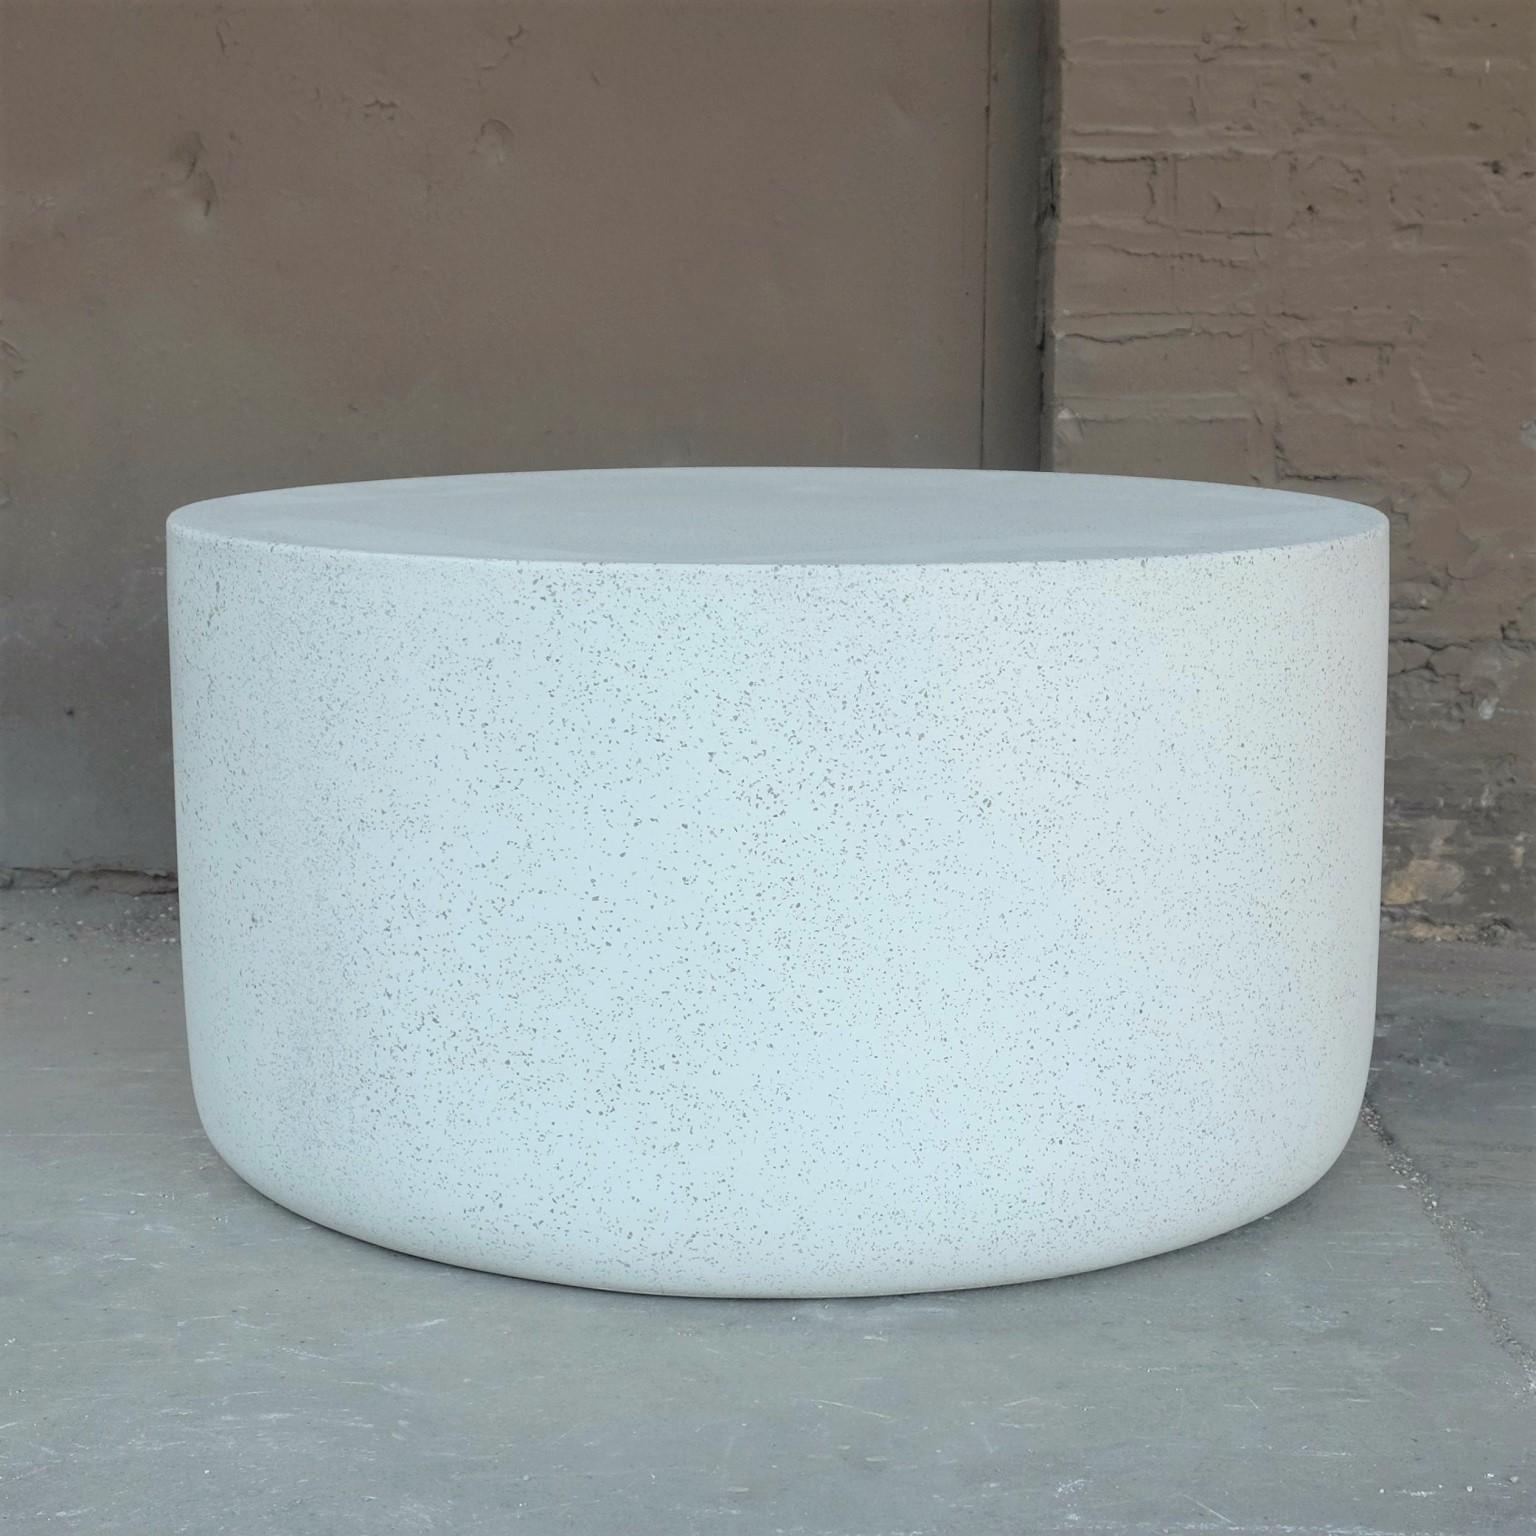 An anchor to the organic world. A rounded base draws the eye downward to earth, keeping you grounded.

Dimensions: Diameter 30 in. (76 cm), height 16 in. (40.6 cm), weight 35 lbs. (16 kg) No assembly required.

Finish color options:
white stone